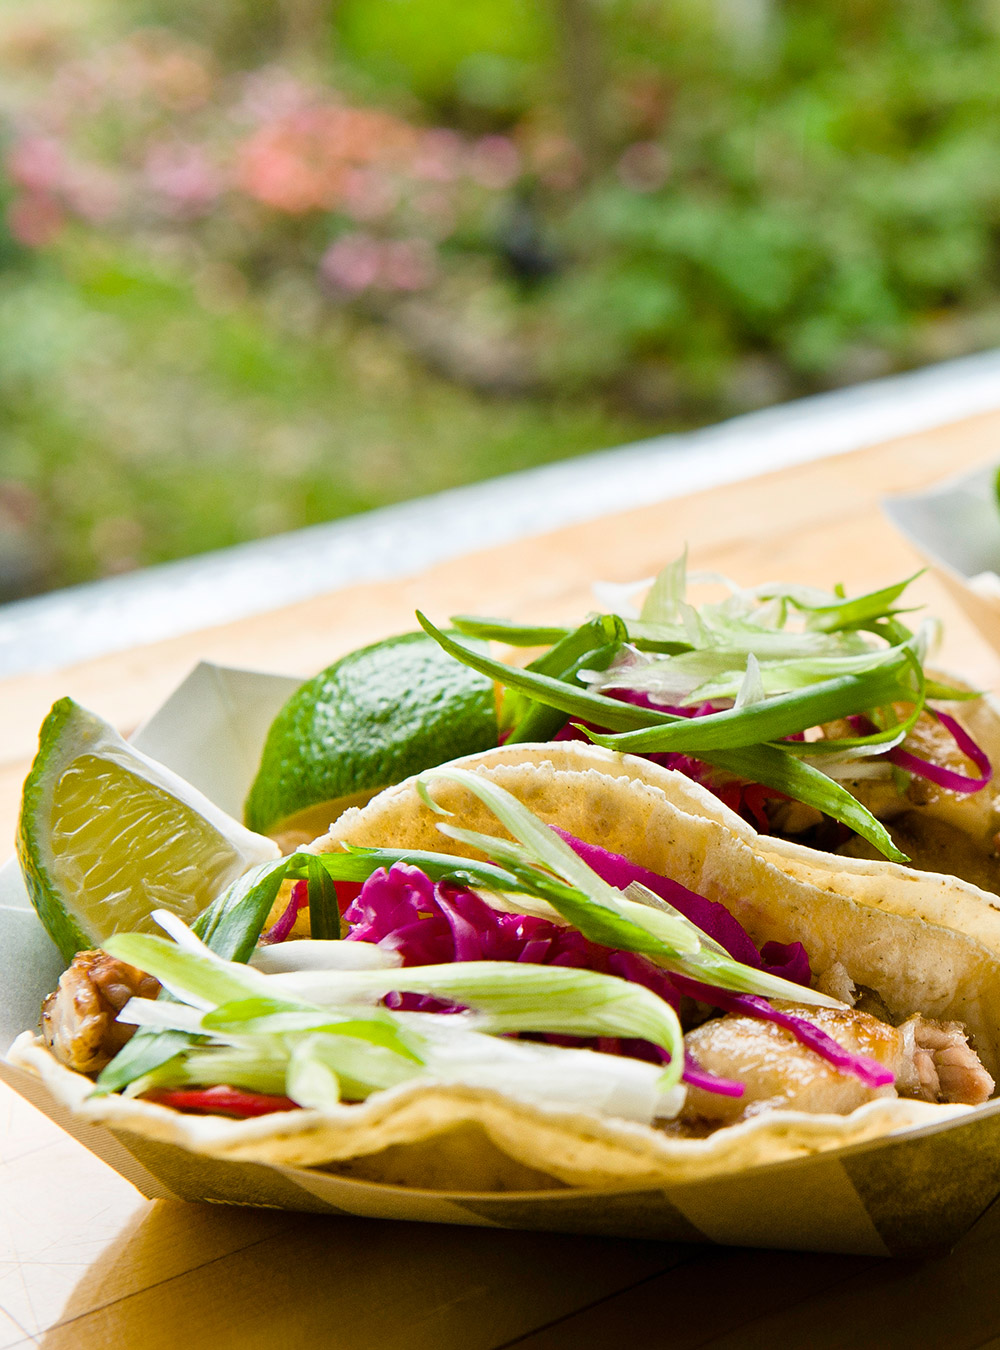 Grumman’s Braised Pork and Buttered Cabbage Tacos